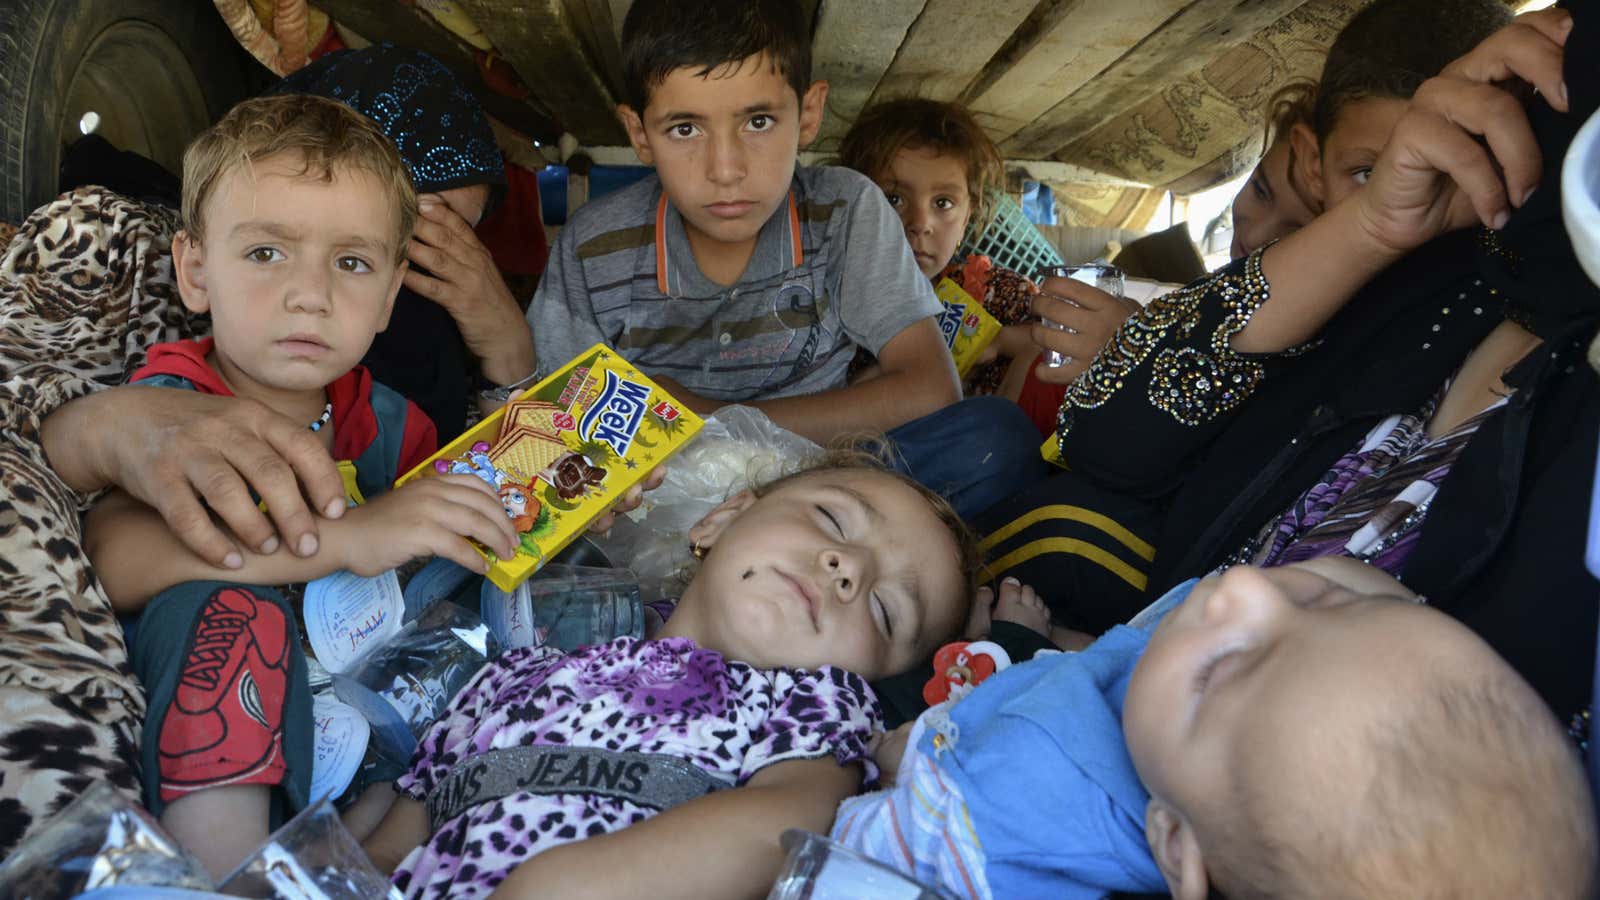 Refugees flee Islamic militants in Iraq in 2014.